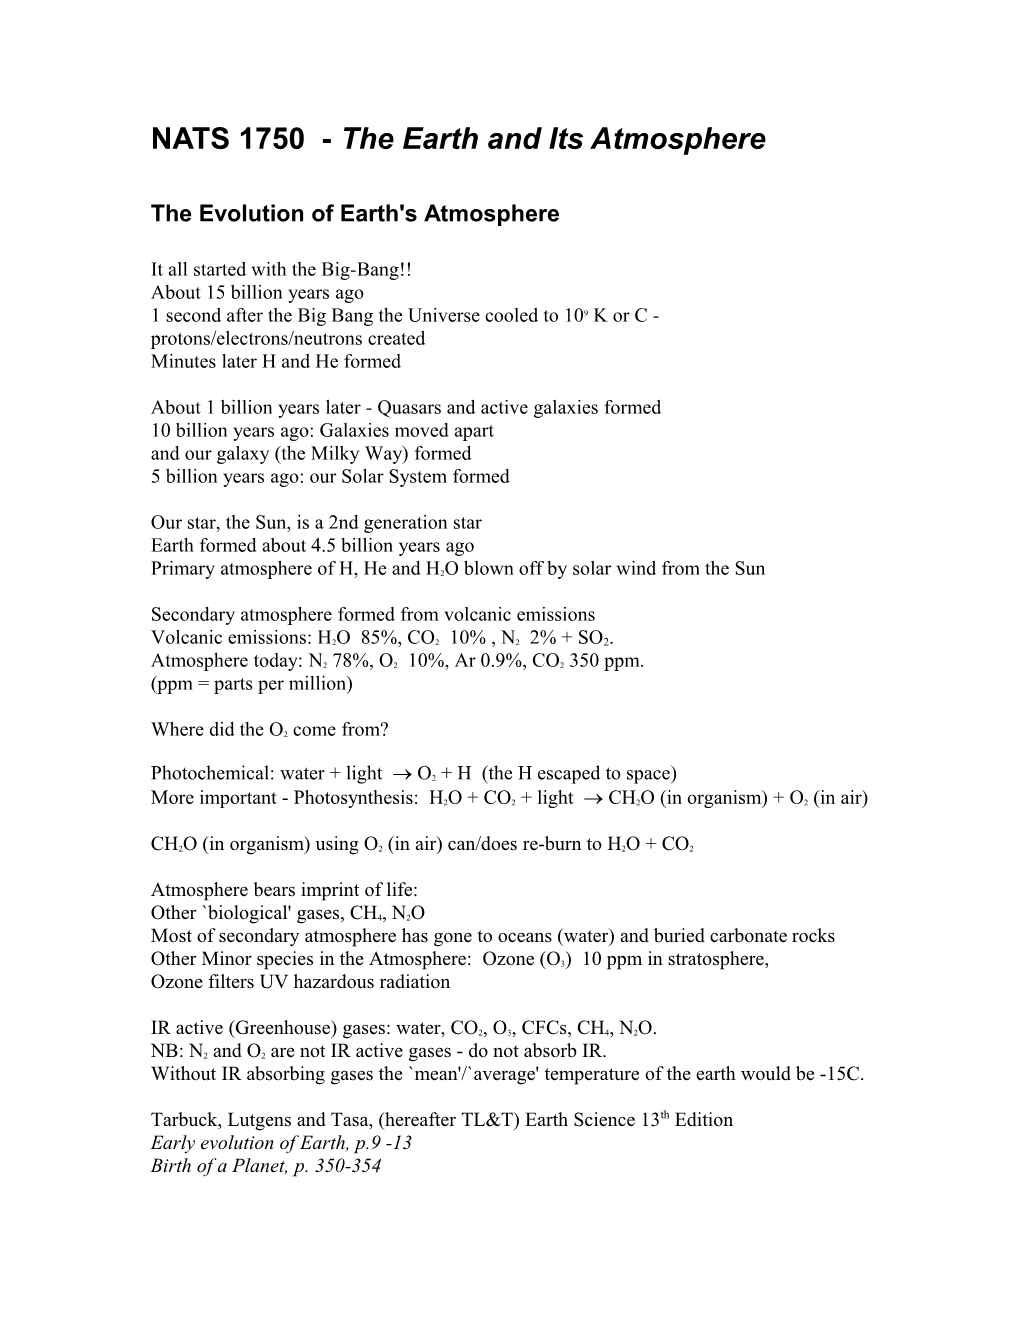 NATS1750 6 - the Earth and Its Atmosphere